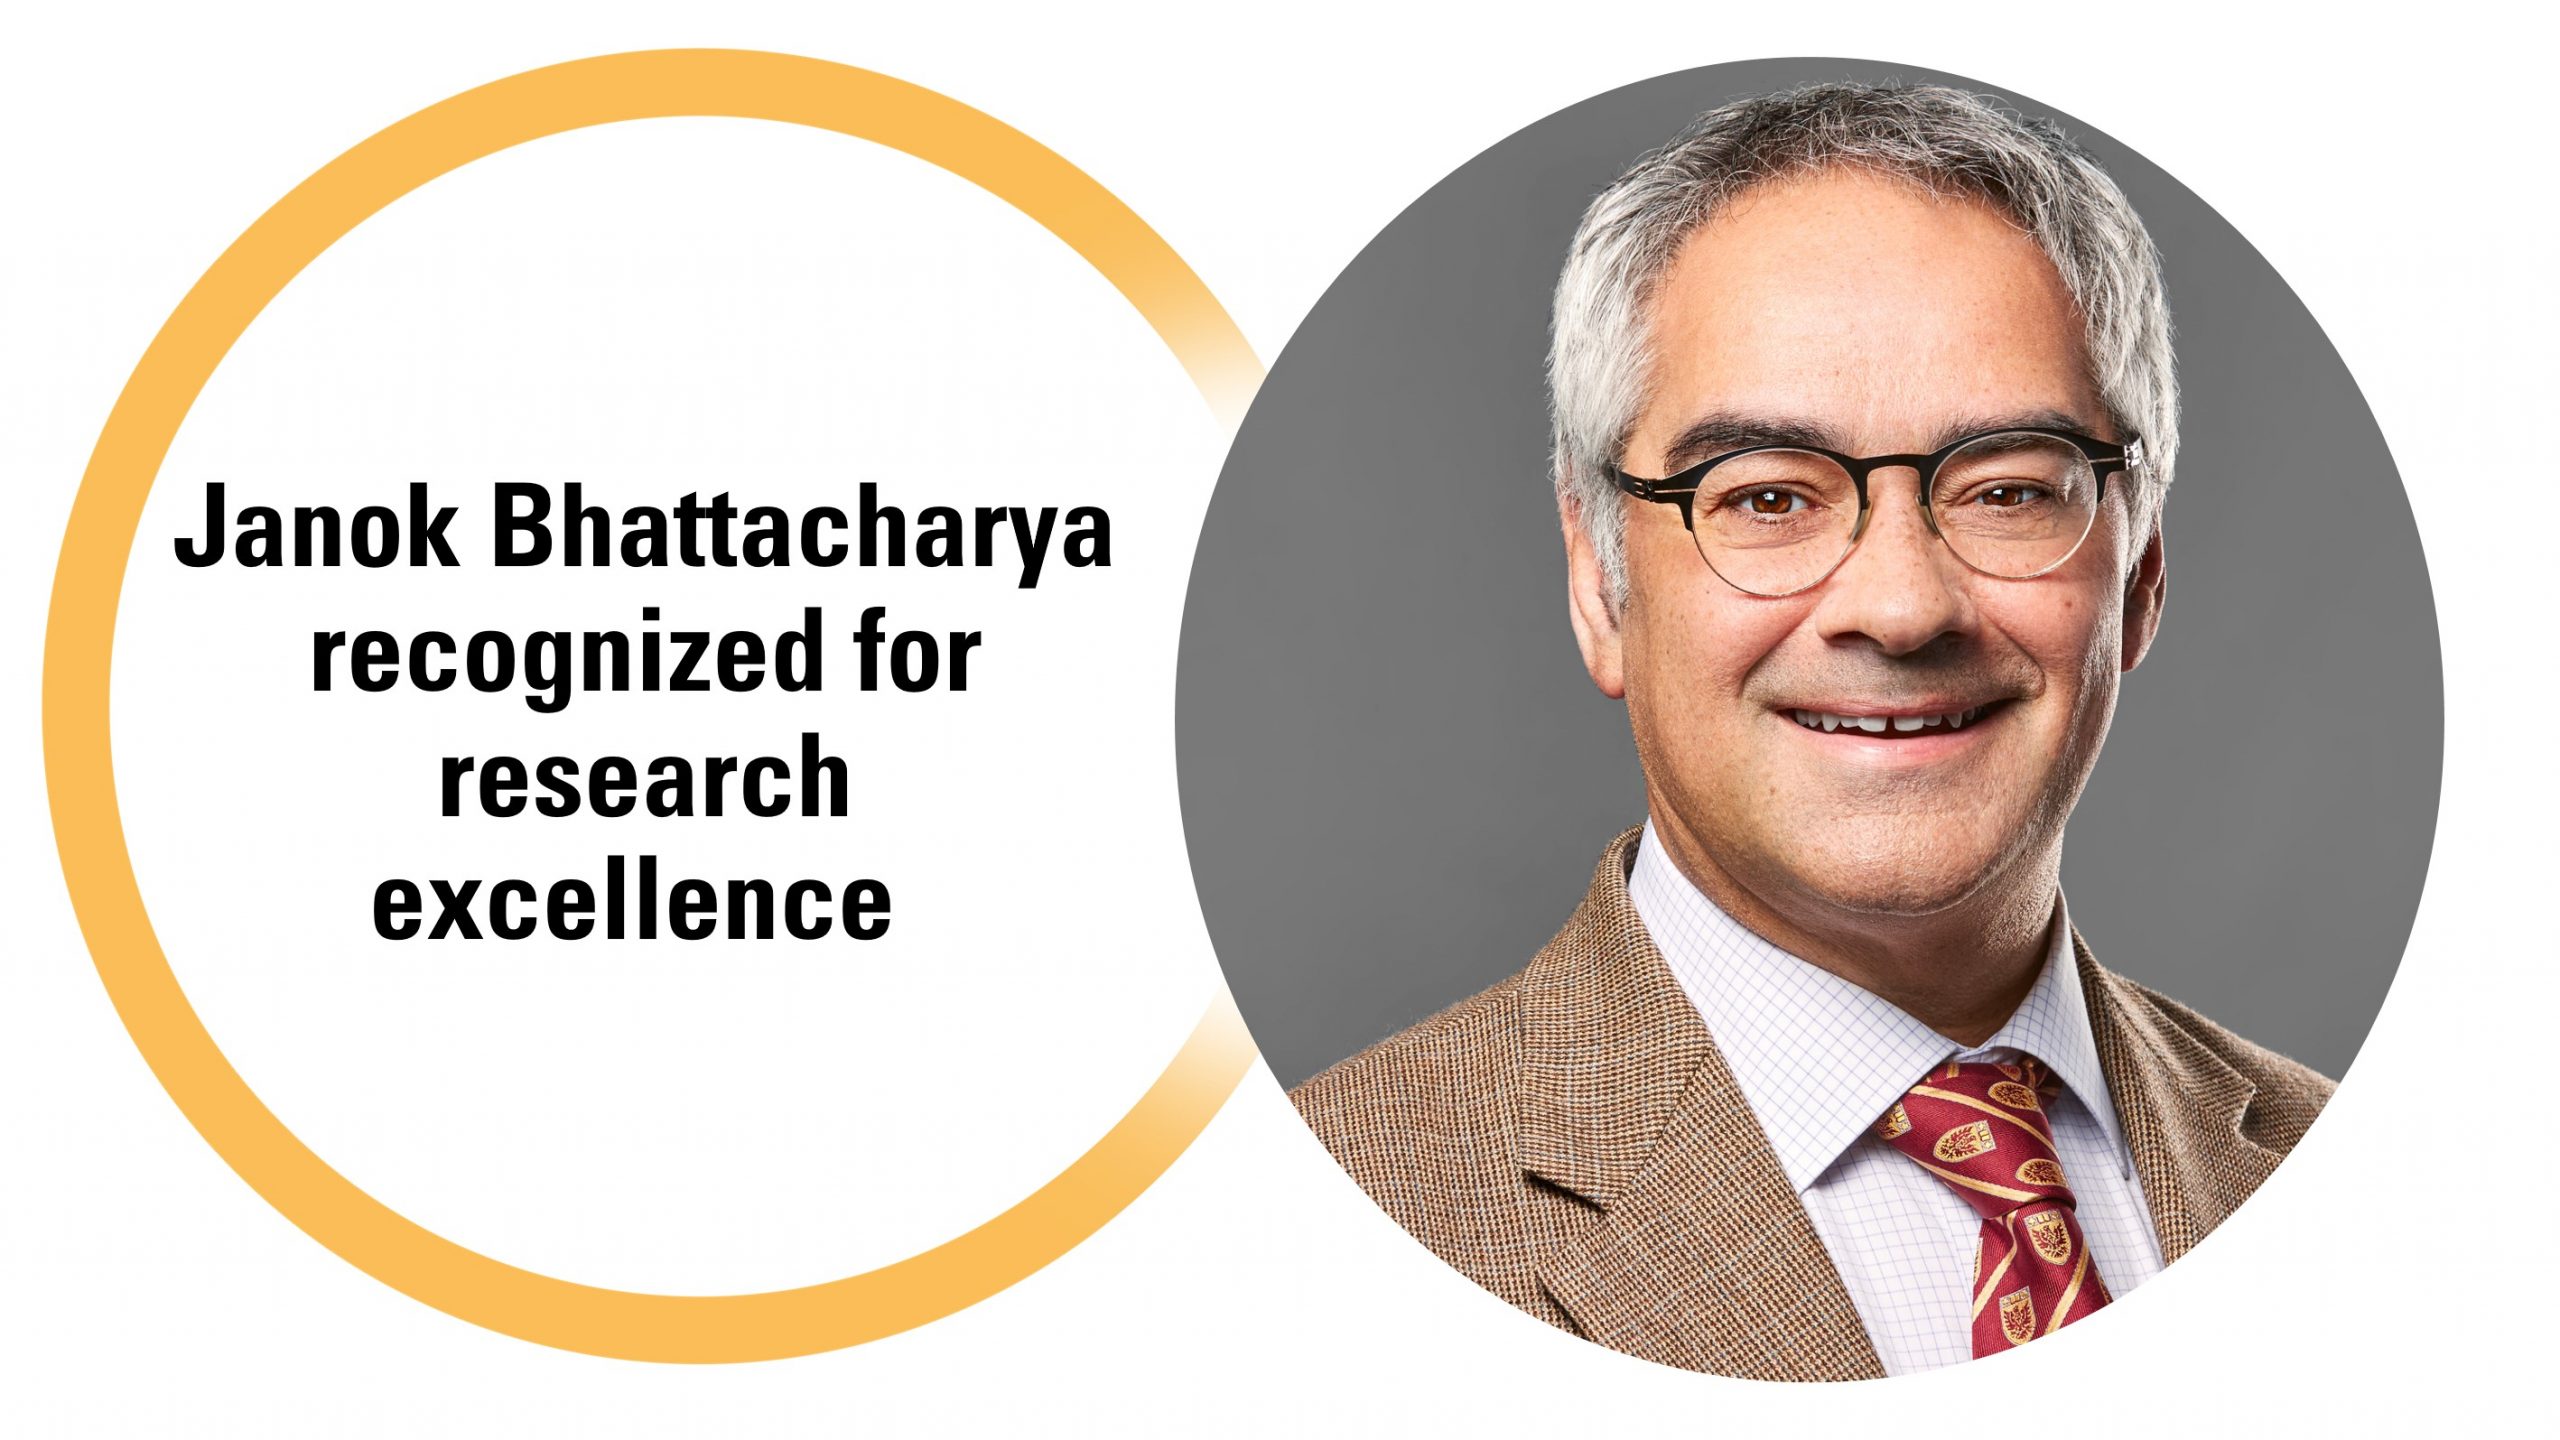 Janok Bhattacharya recognized for research excellence